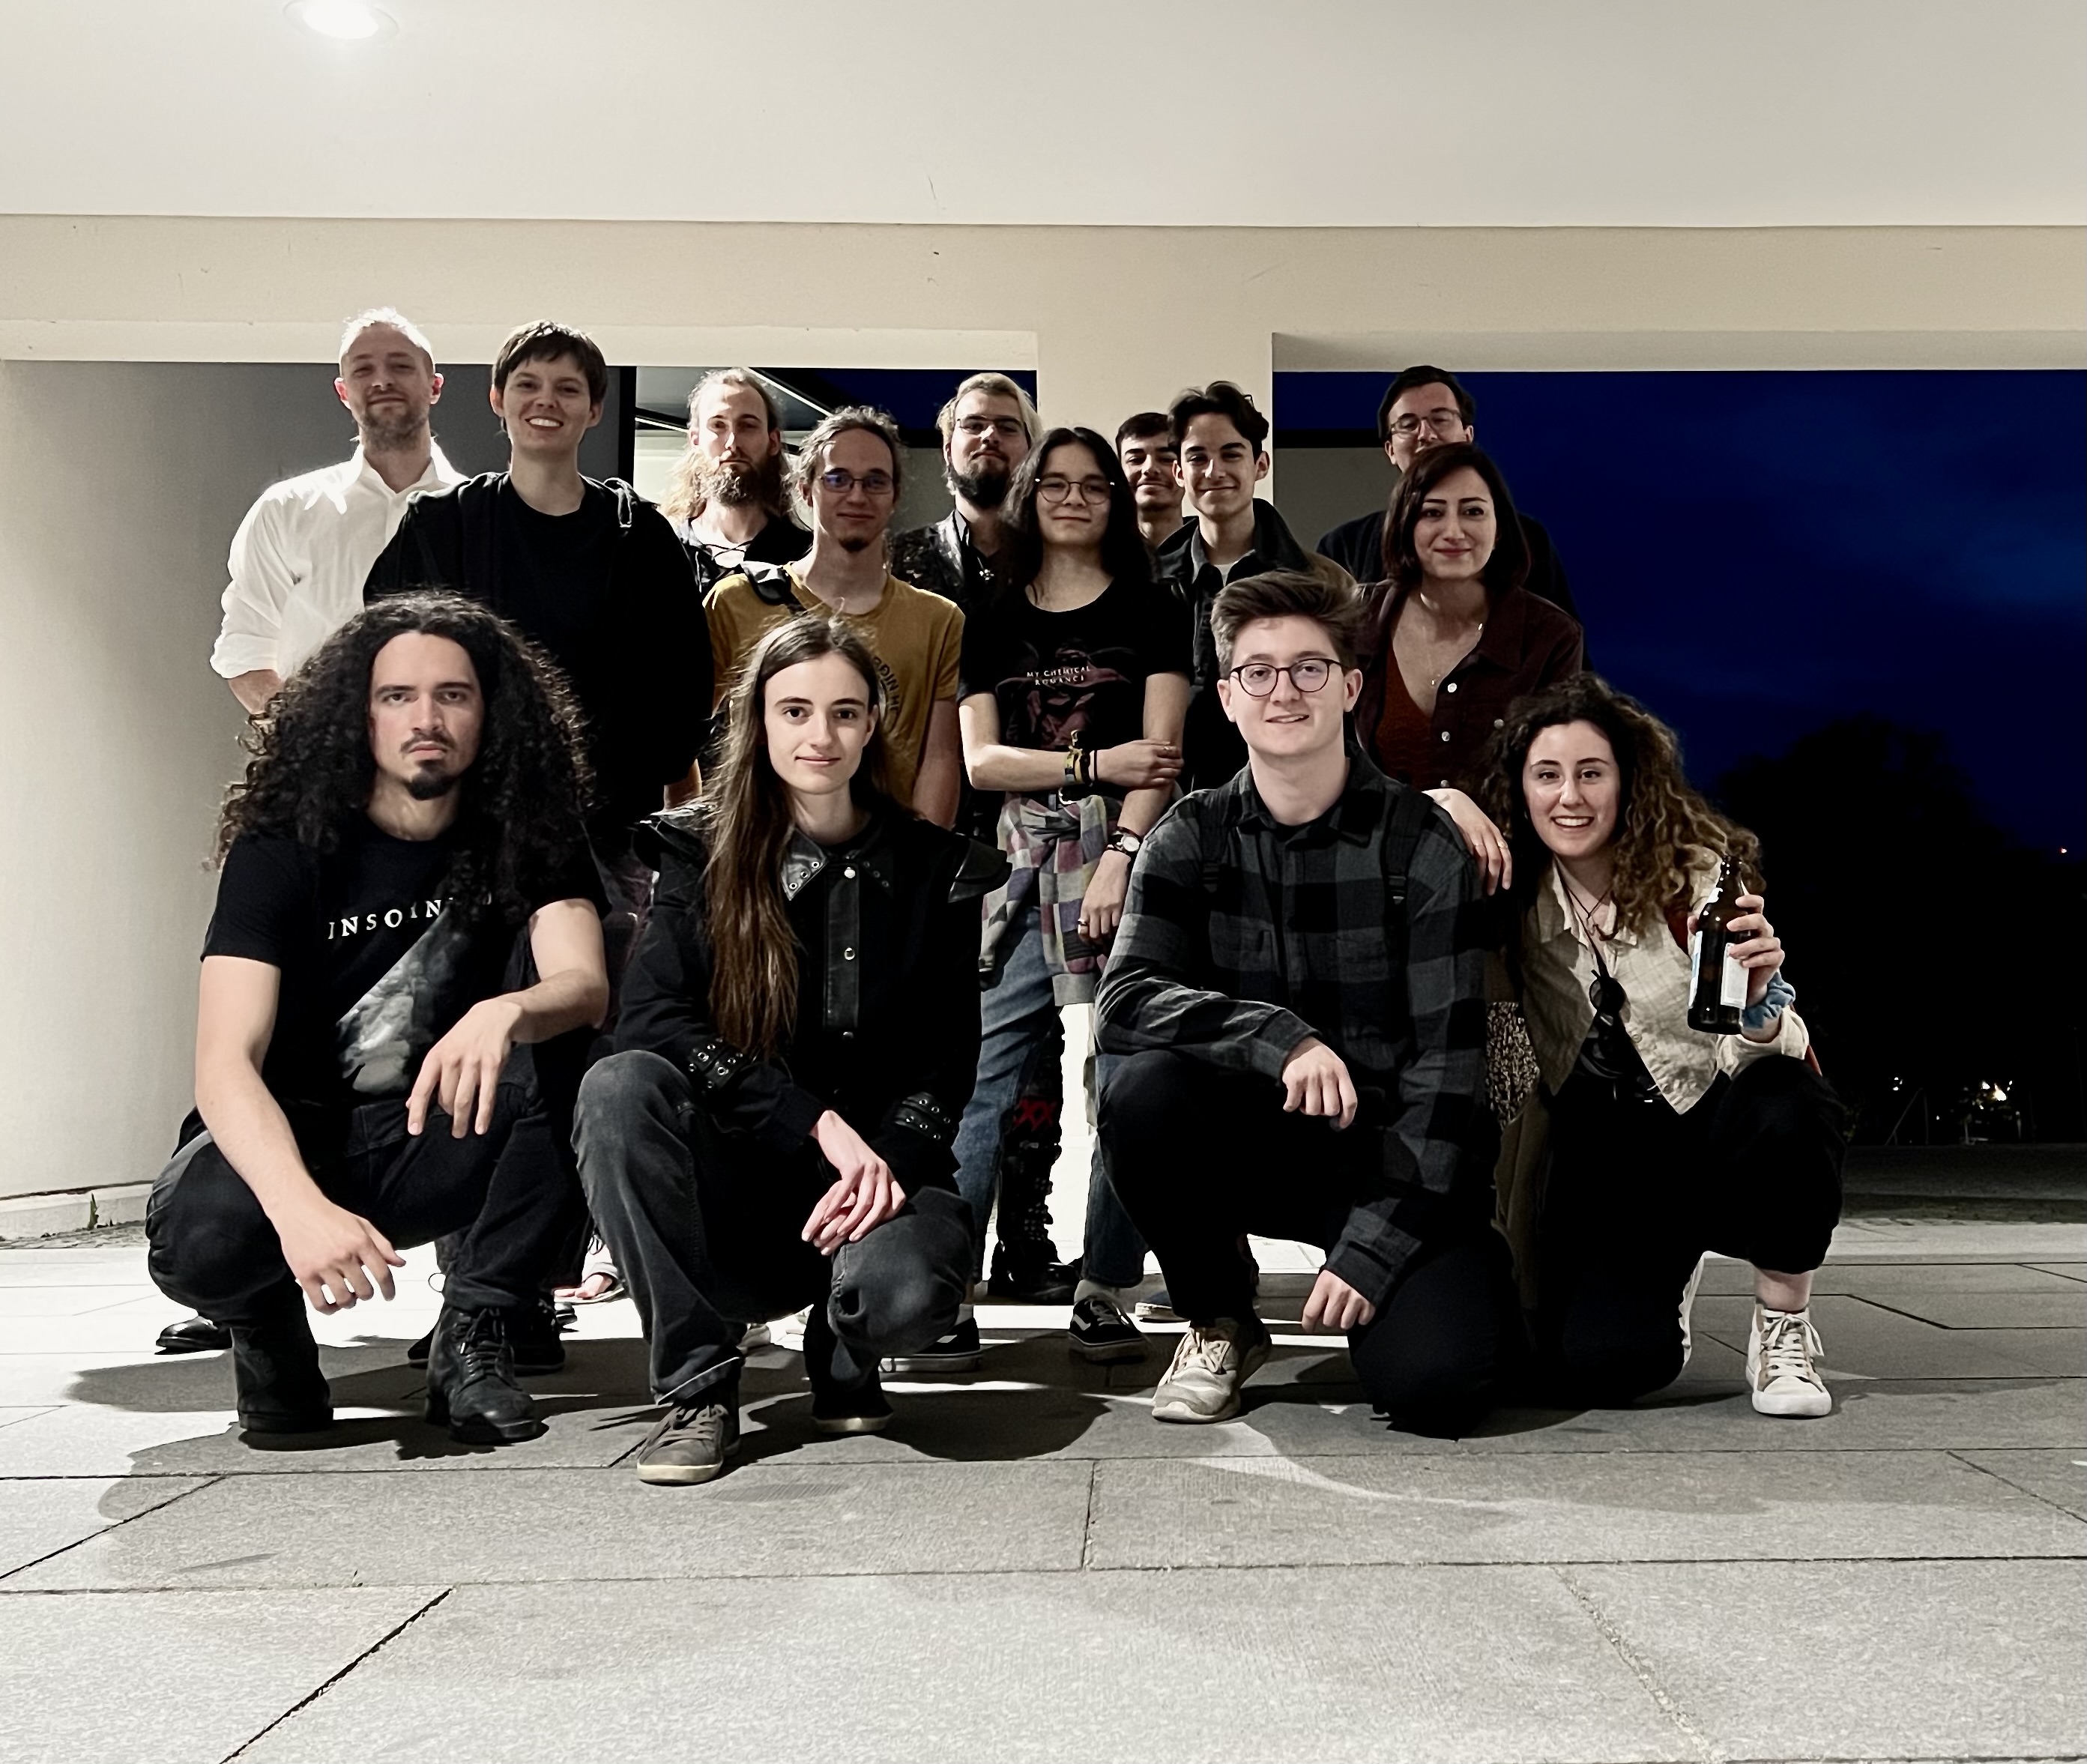 group photo of bleak sanctuary band members among 10 friends and fans